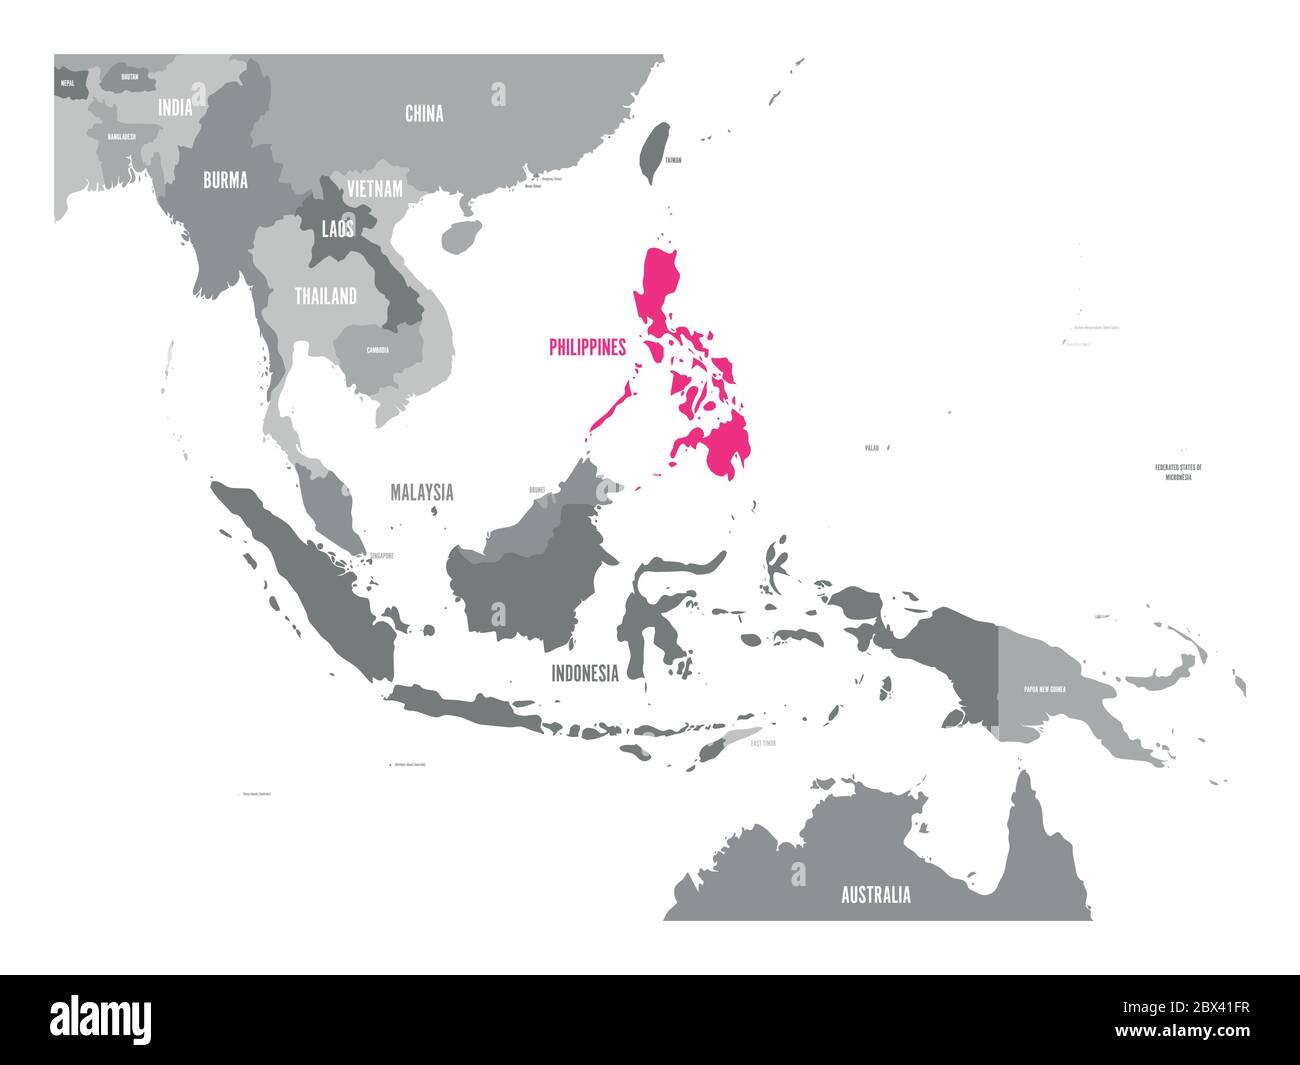 Vector map of Philippines. Pink highlighted in Southeast Asia region. Stock Vector